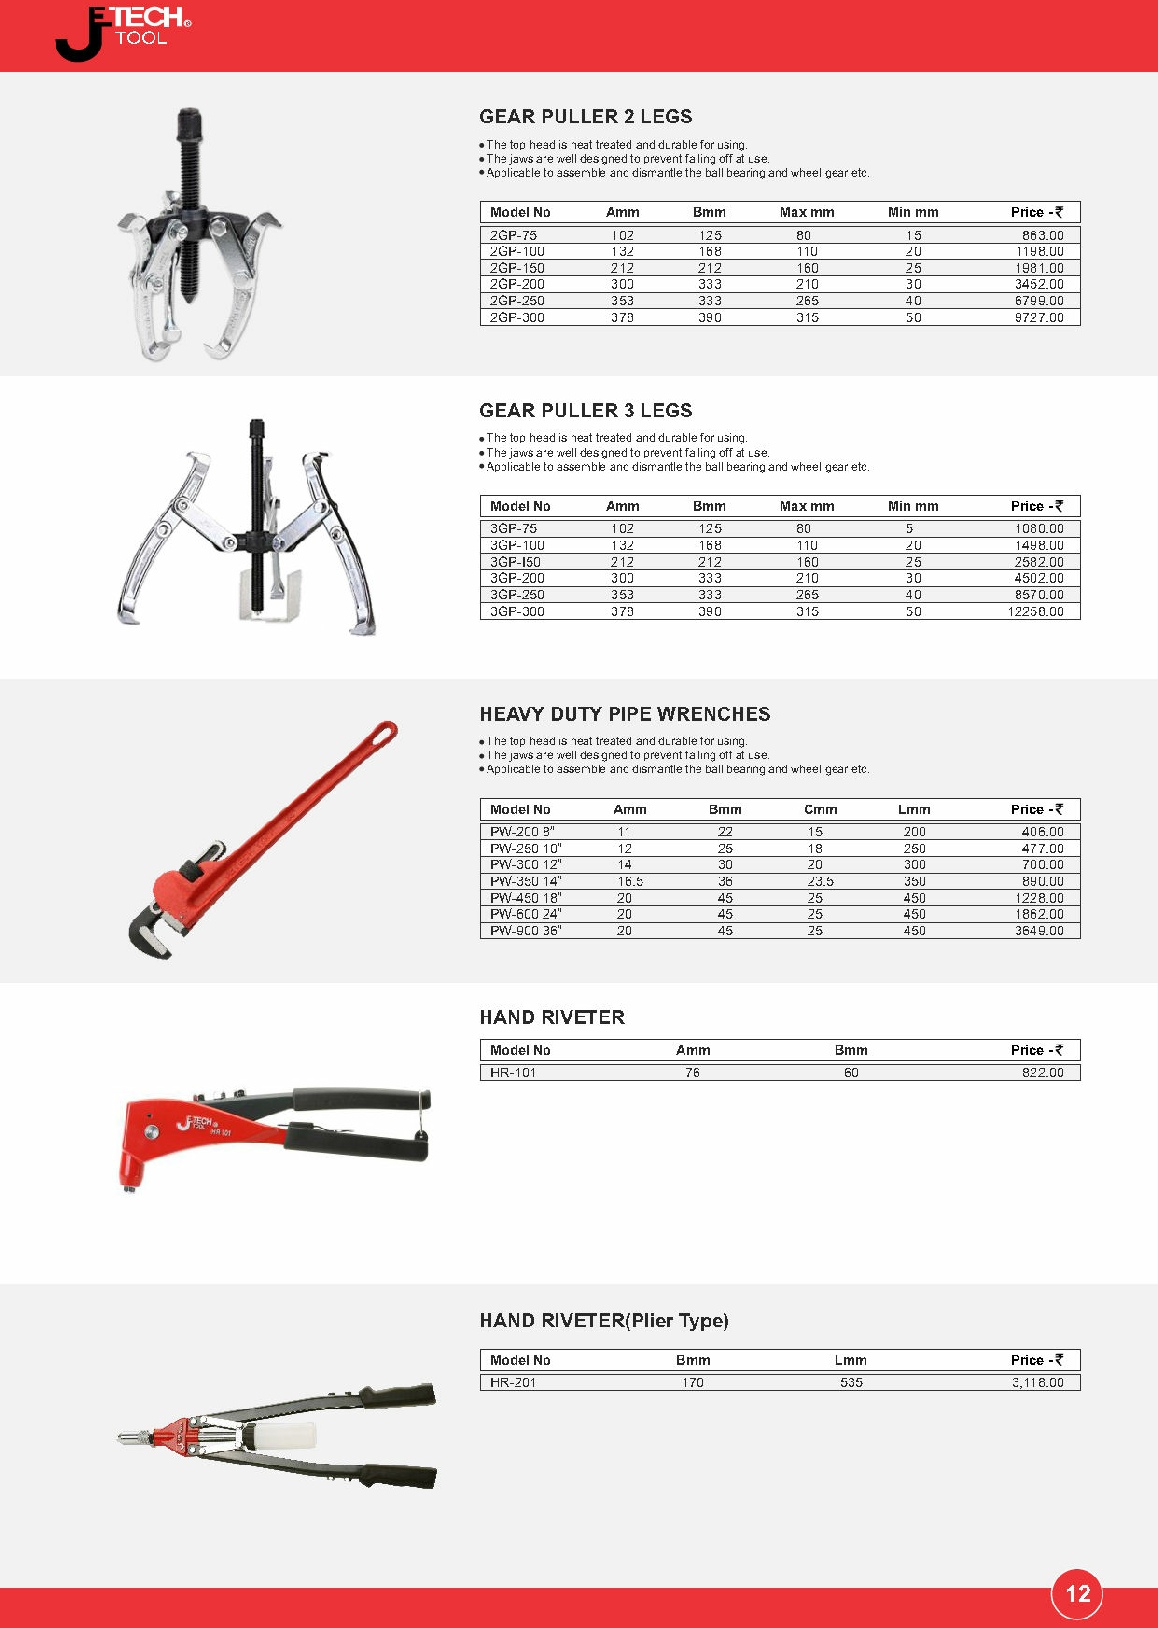 gear puller, heavy duty pipe wrench,hand riveter, chennai